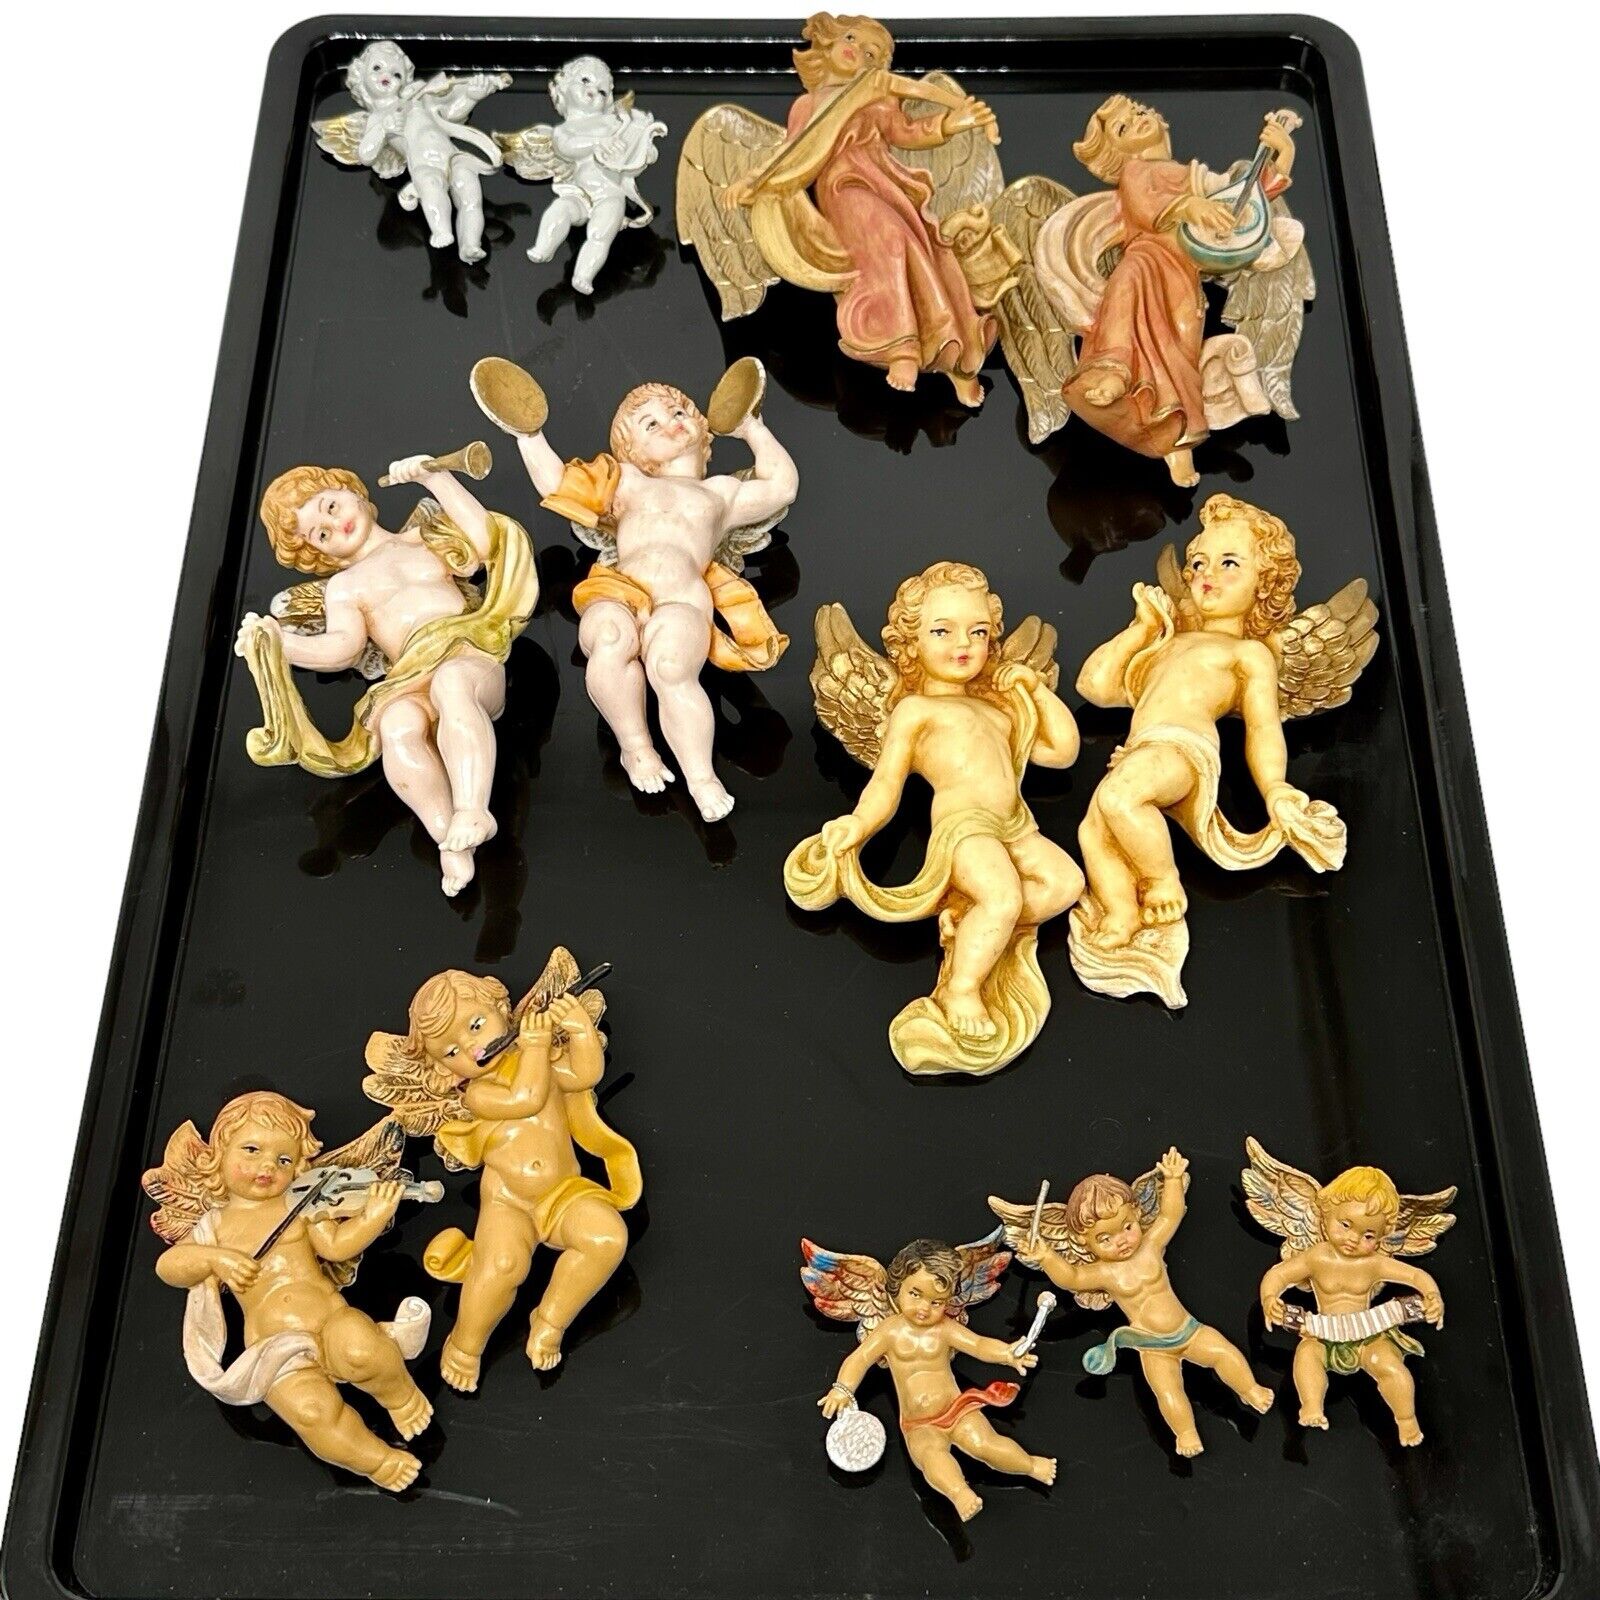 Lot of 18 Vintage Cherub Figurines Musical Angels Ornaments Made in Italy